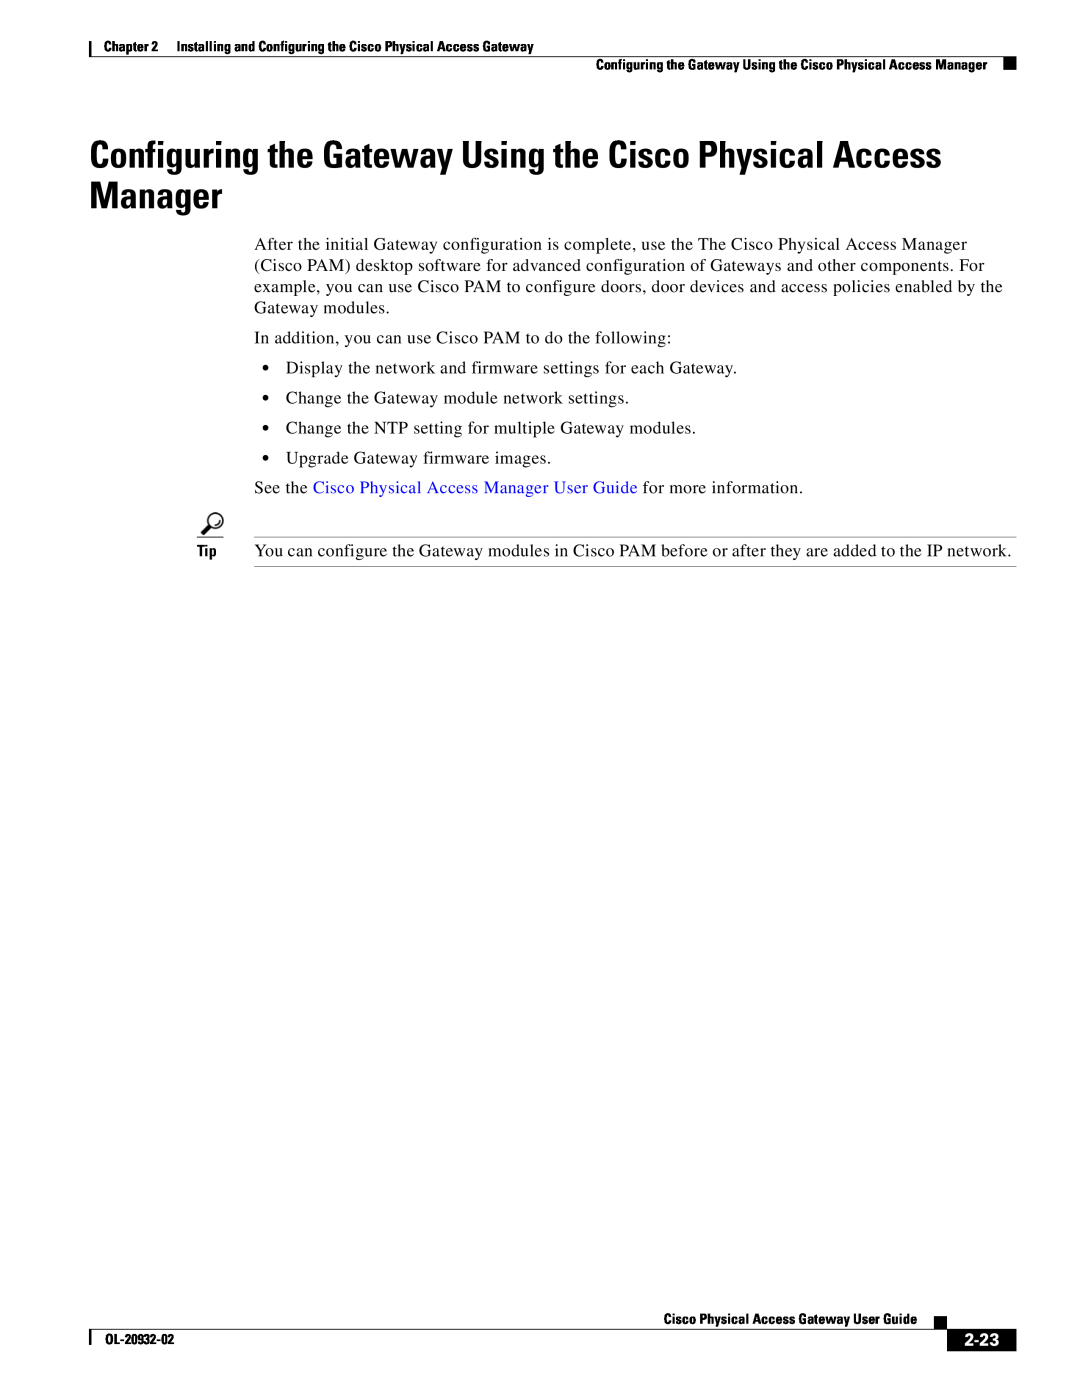 Cisco Systems OL-20932-02 manual Configuring the Gateway Using the Cisco Physical Access Manager, 2-23 